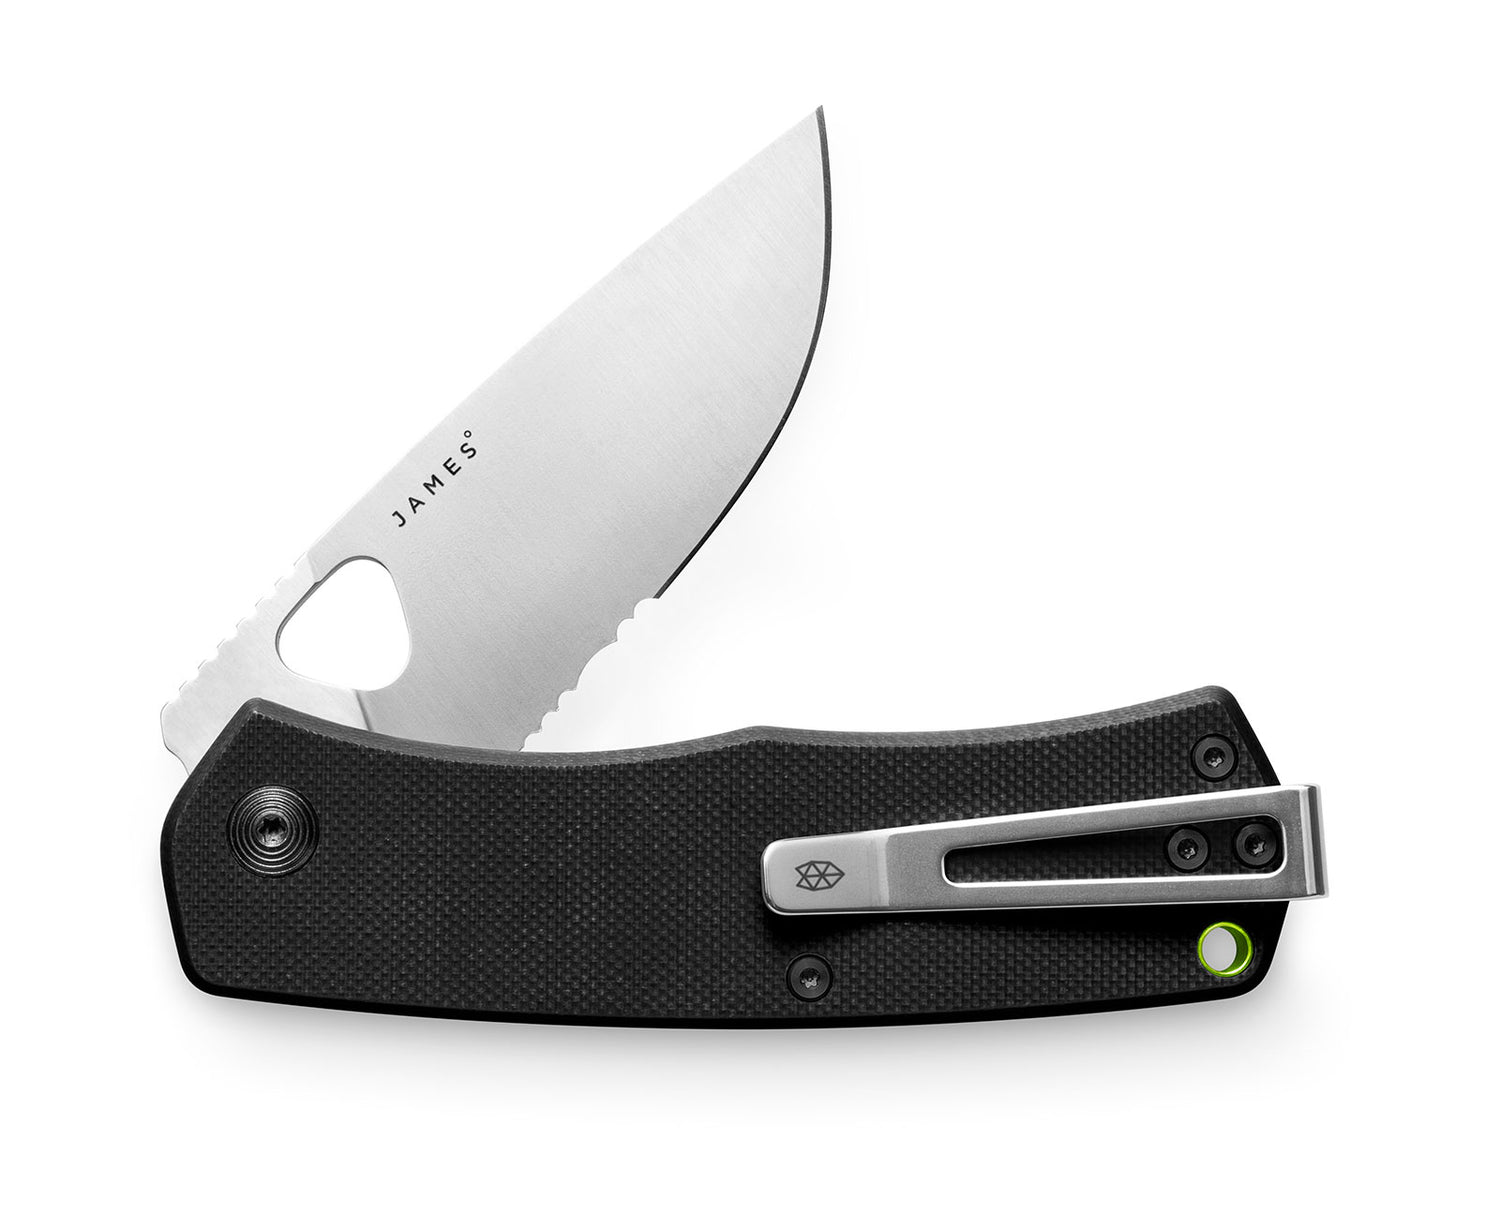 The Folsom knife with black handle and serrated, stainless steel blade.